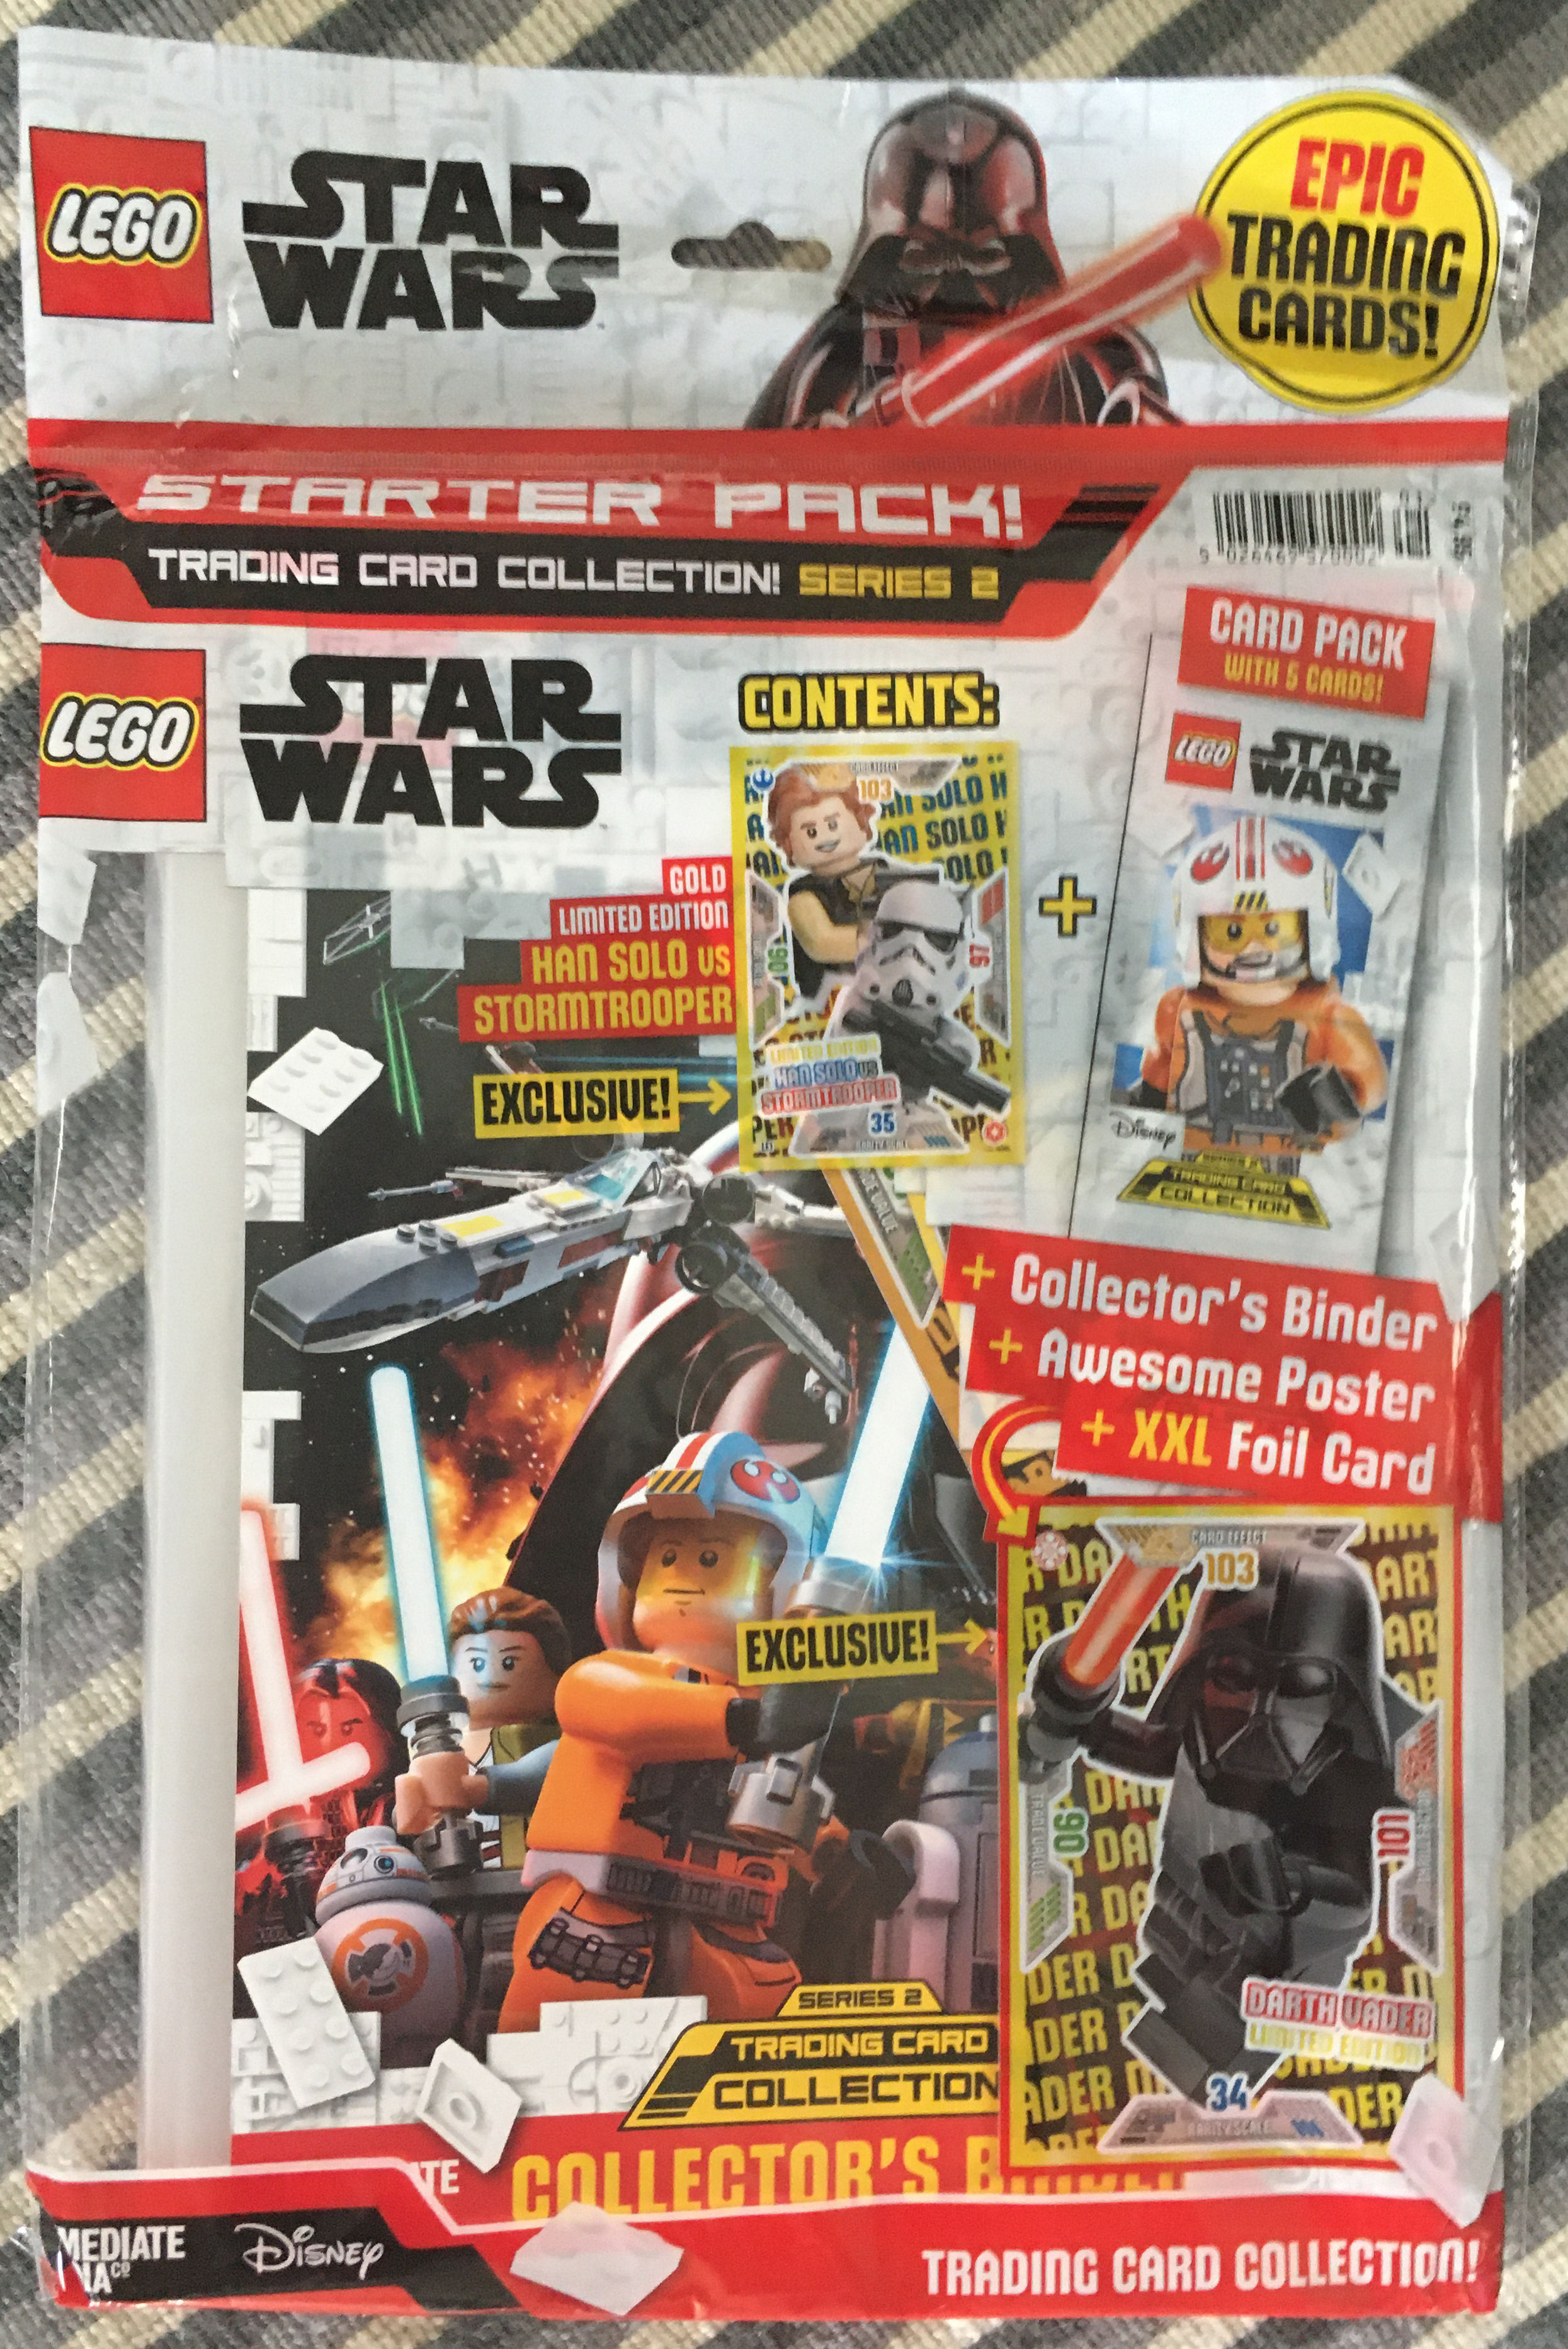 Star Wars Lego Trading Cards Series 1 154-200 No pick any 6 cards for £4.50